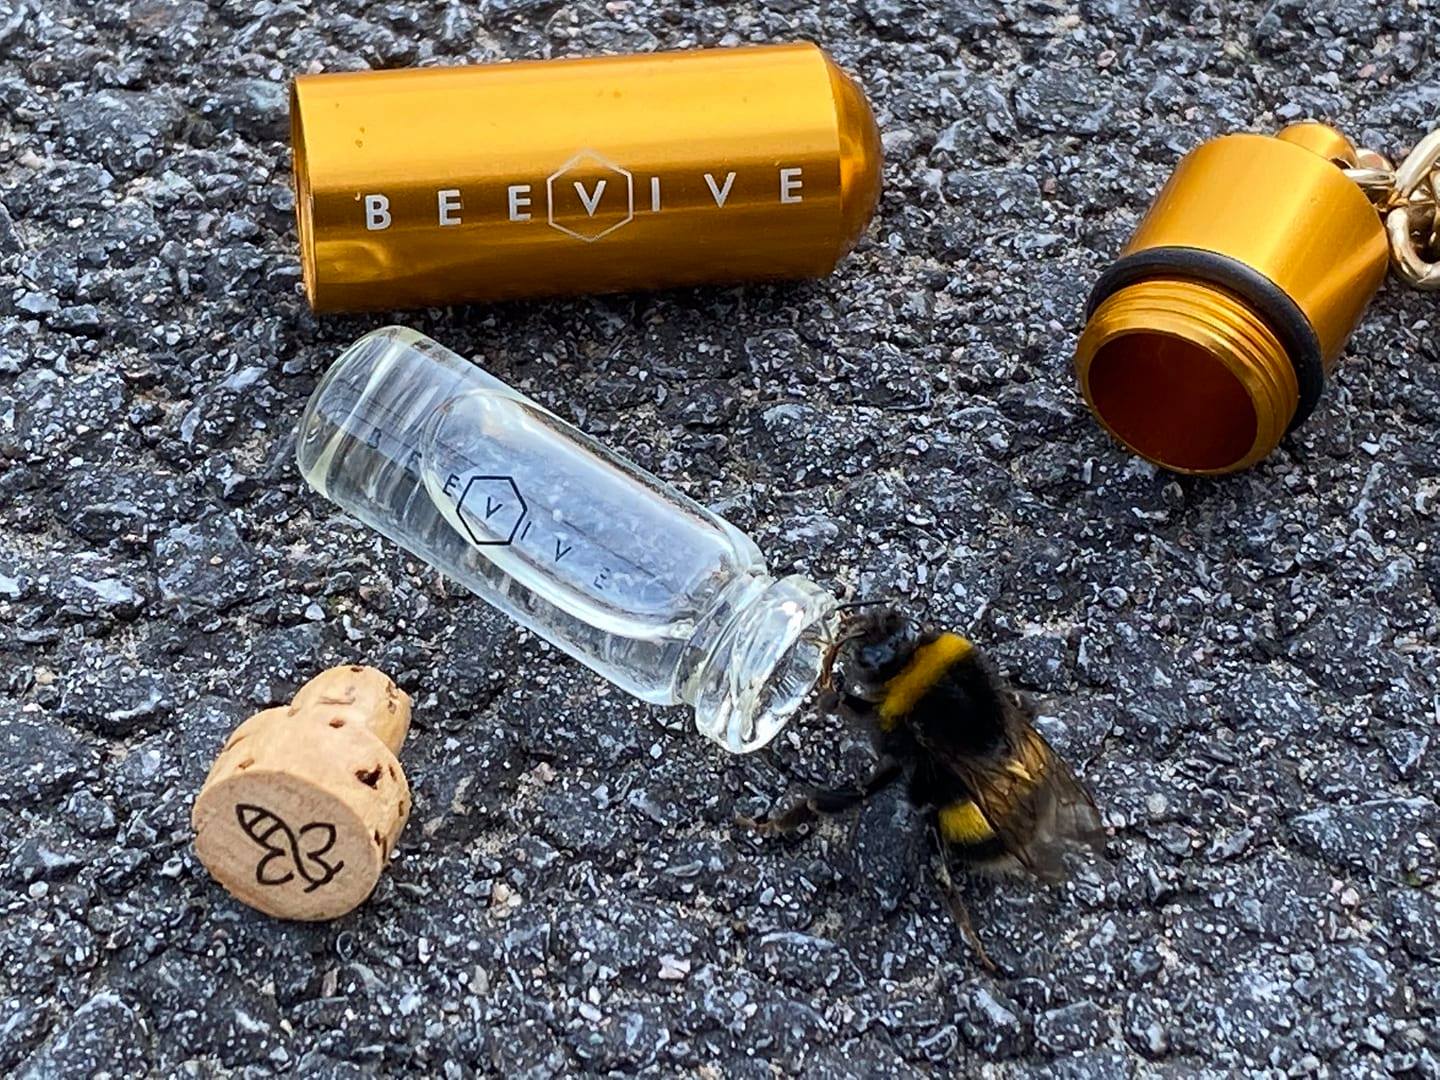 Gold Bee Revival Kit in action